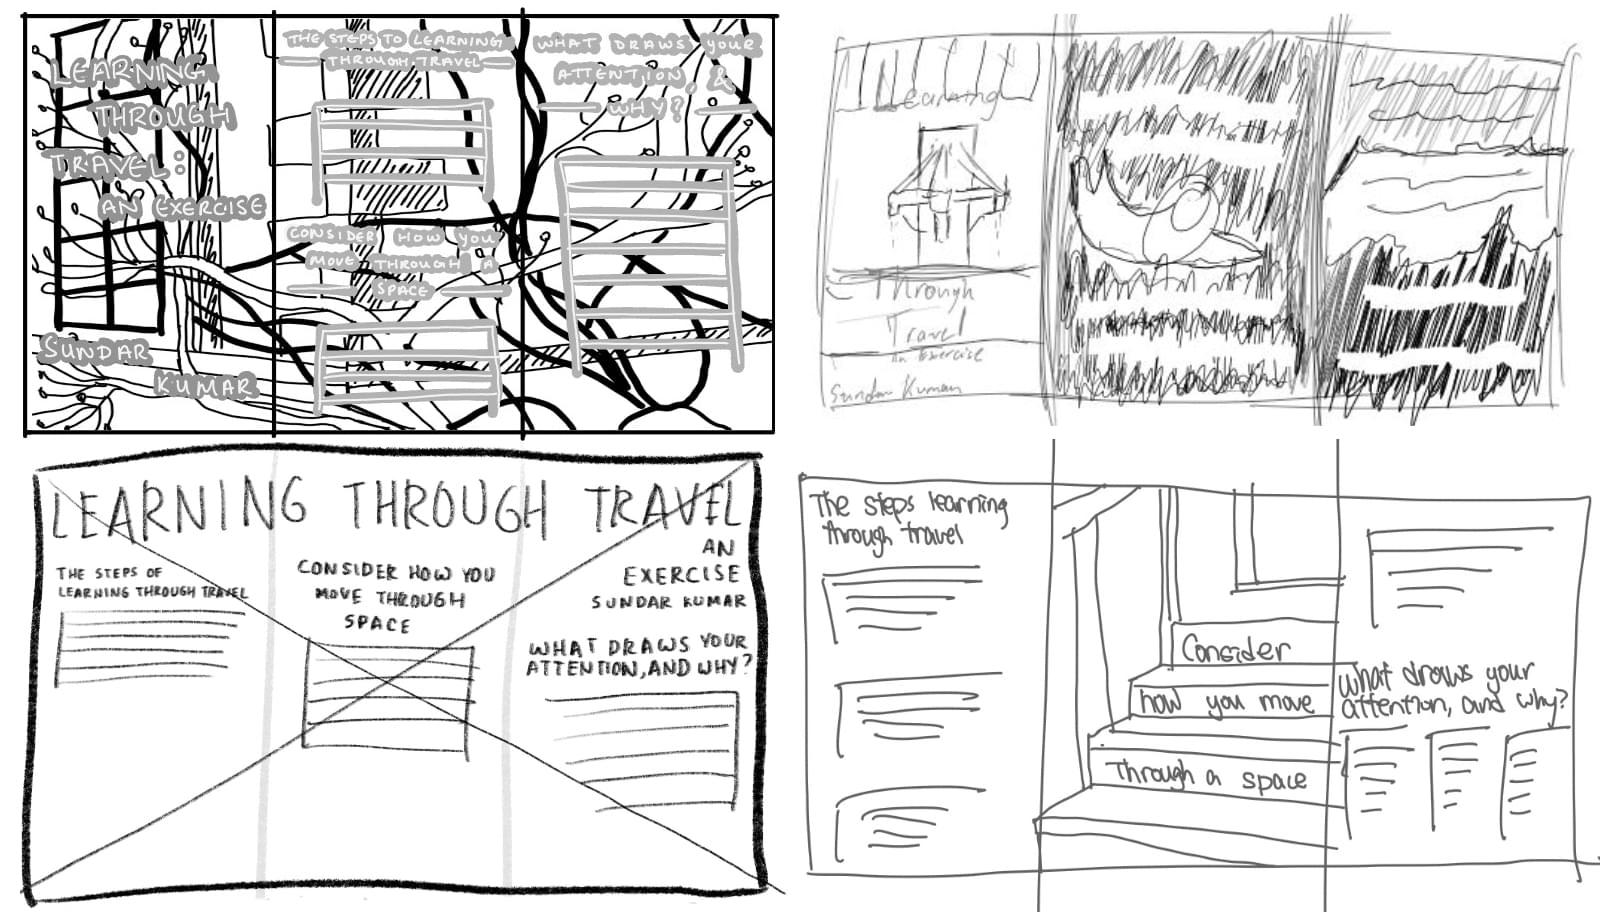 A pair of sketches exploring using images as a frame for text